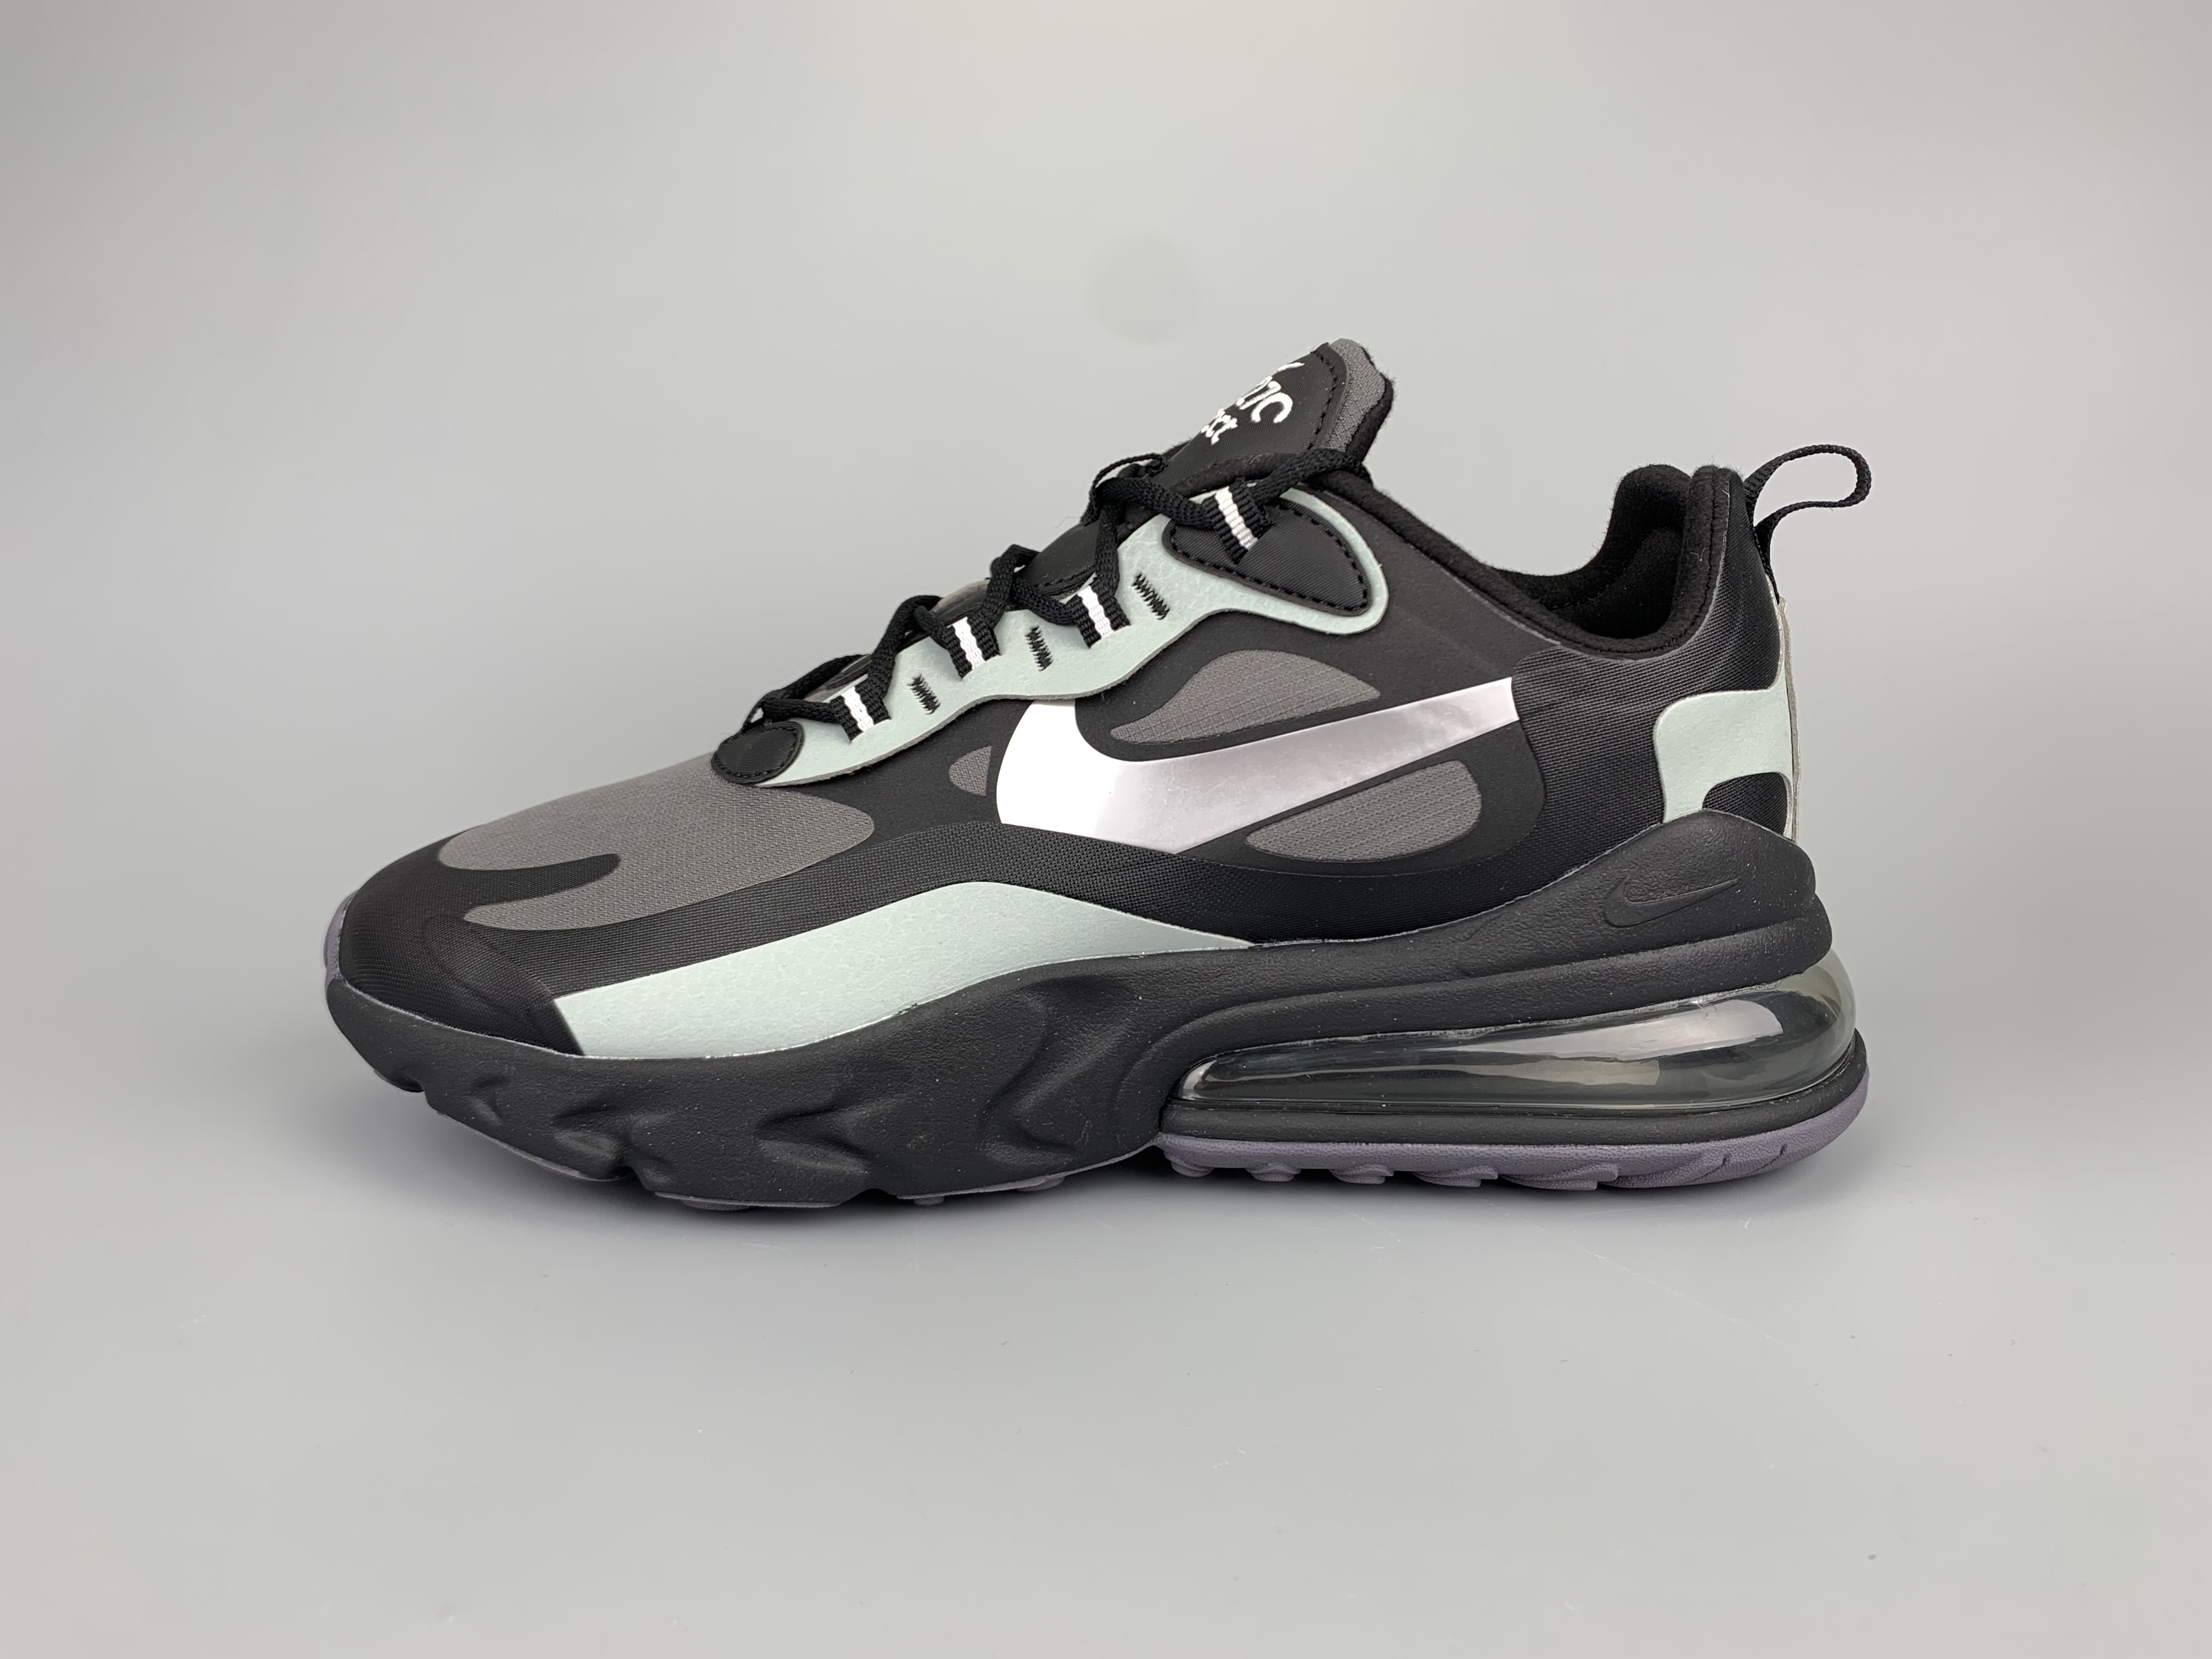 Men's Hot sale Running weapon Nike Air Max Shoes 004